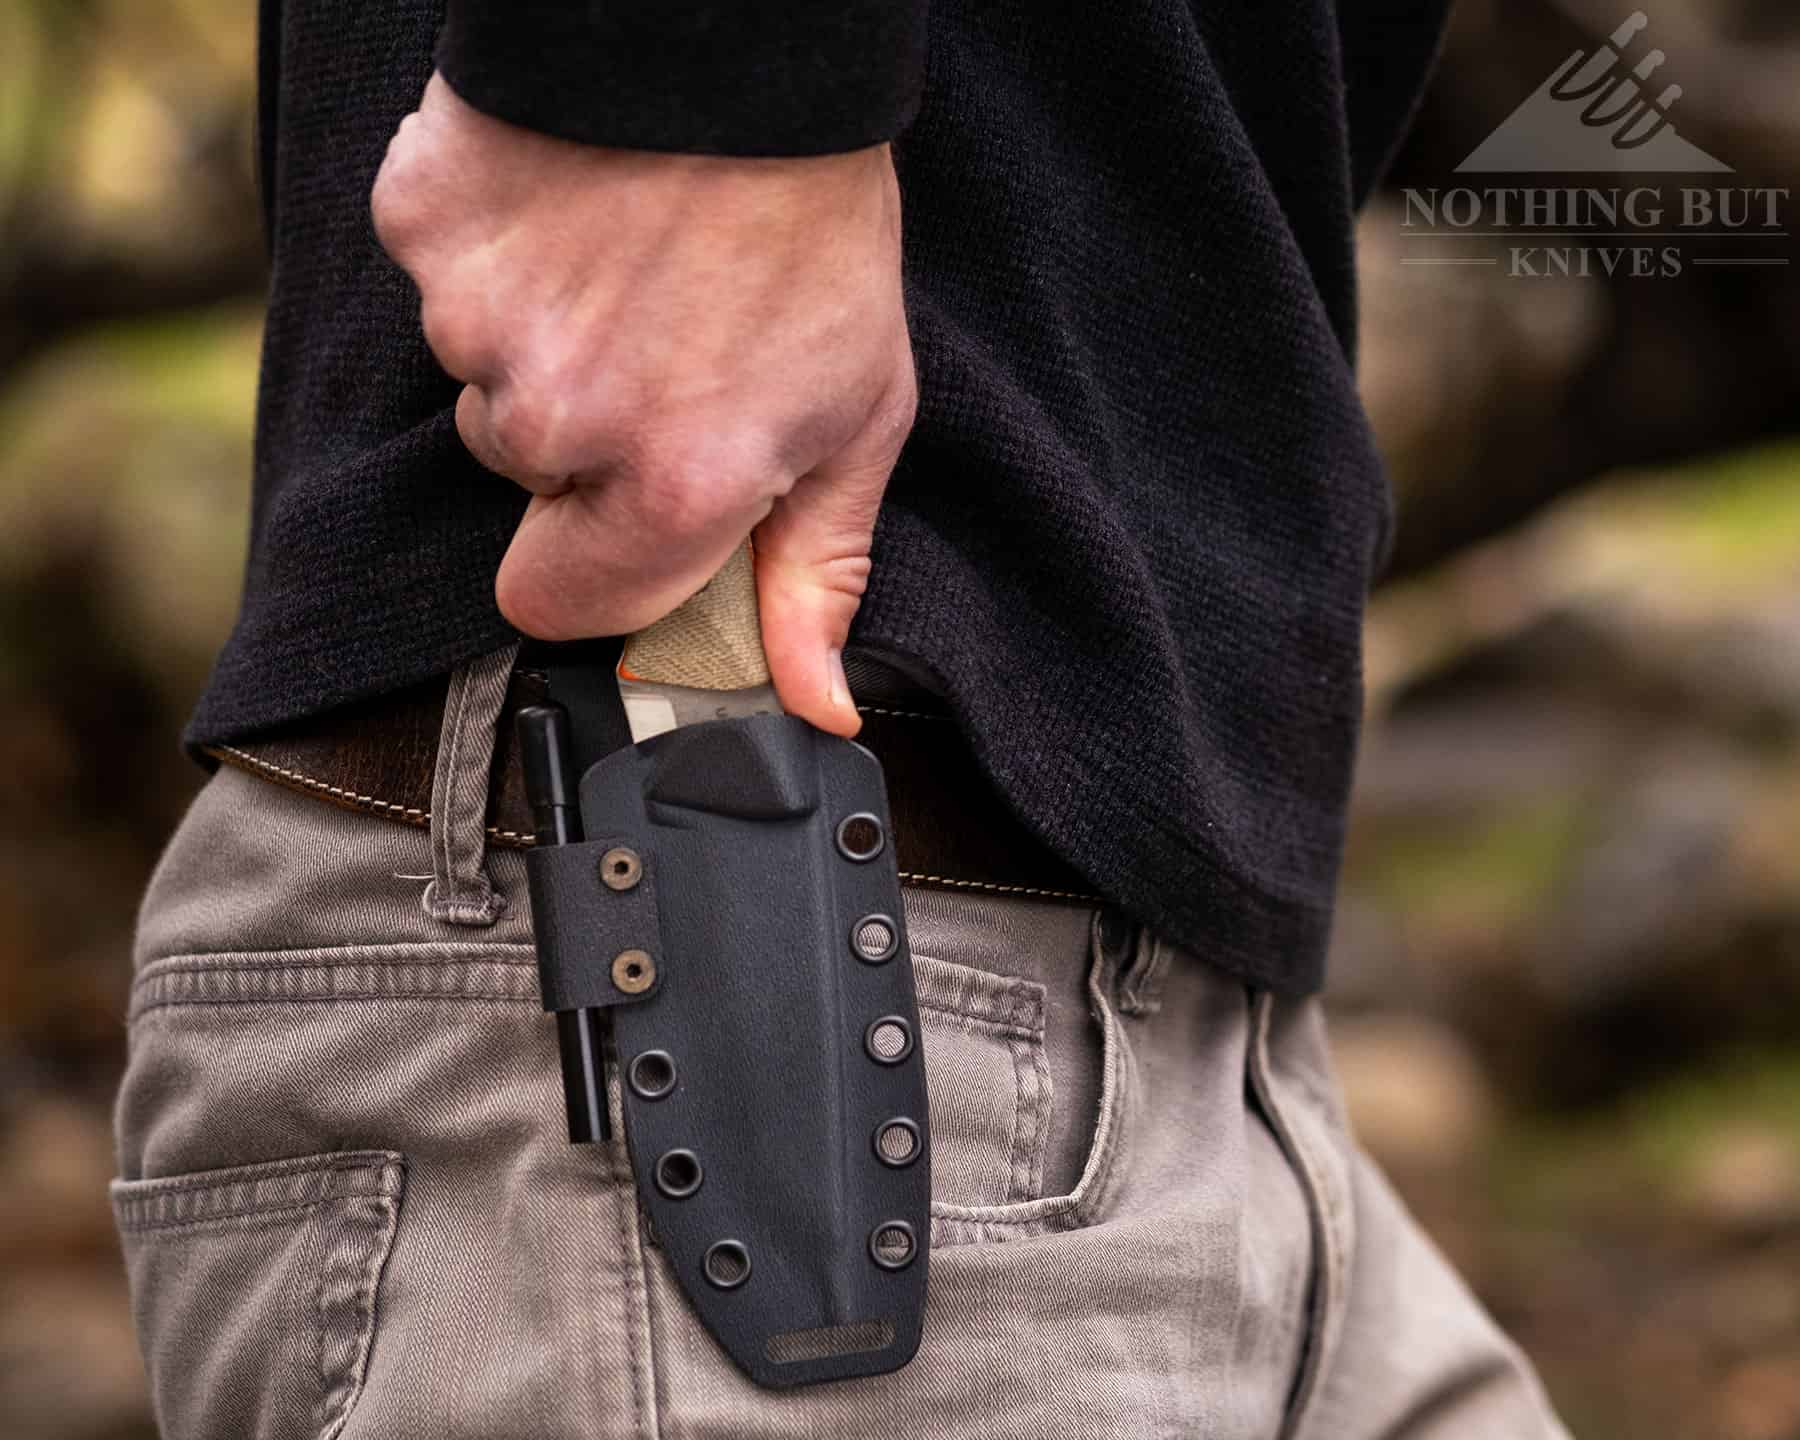 The Firecraft sheaths all have a thumb ledge for drawing the knife. This is all you need to overcome the strong hold of the sheath.